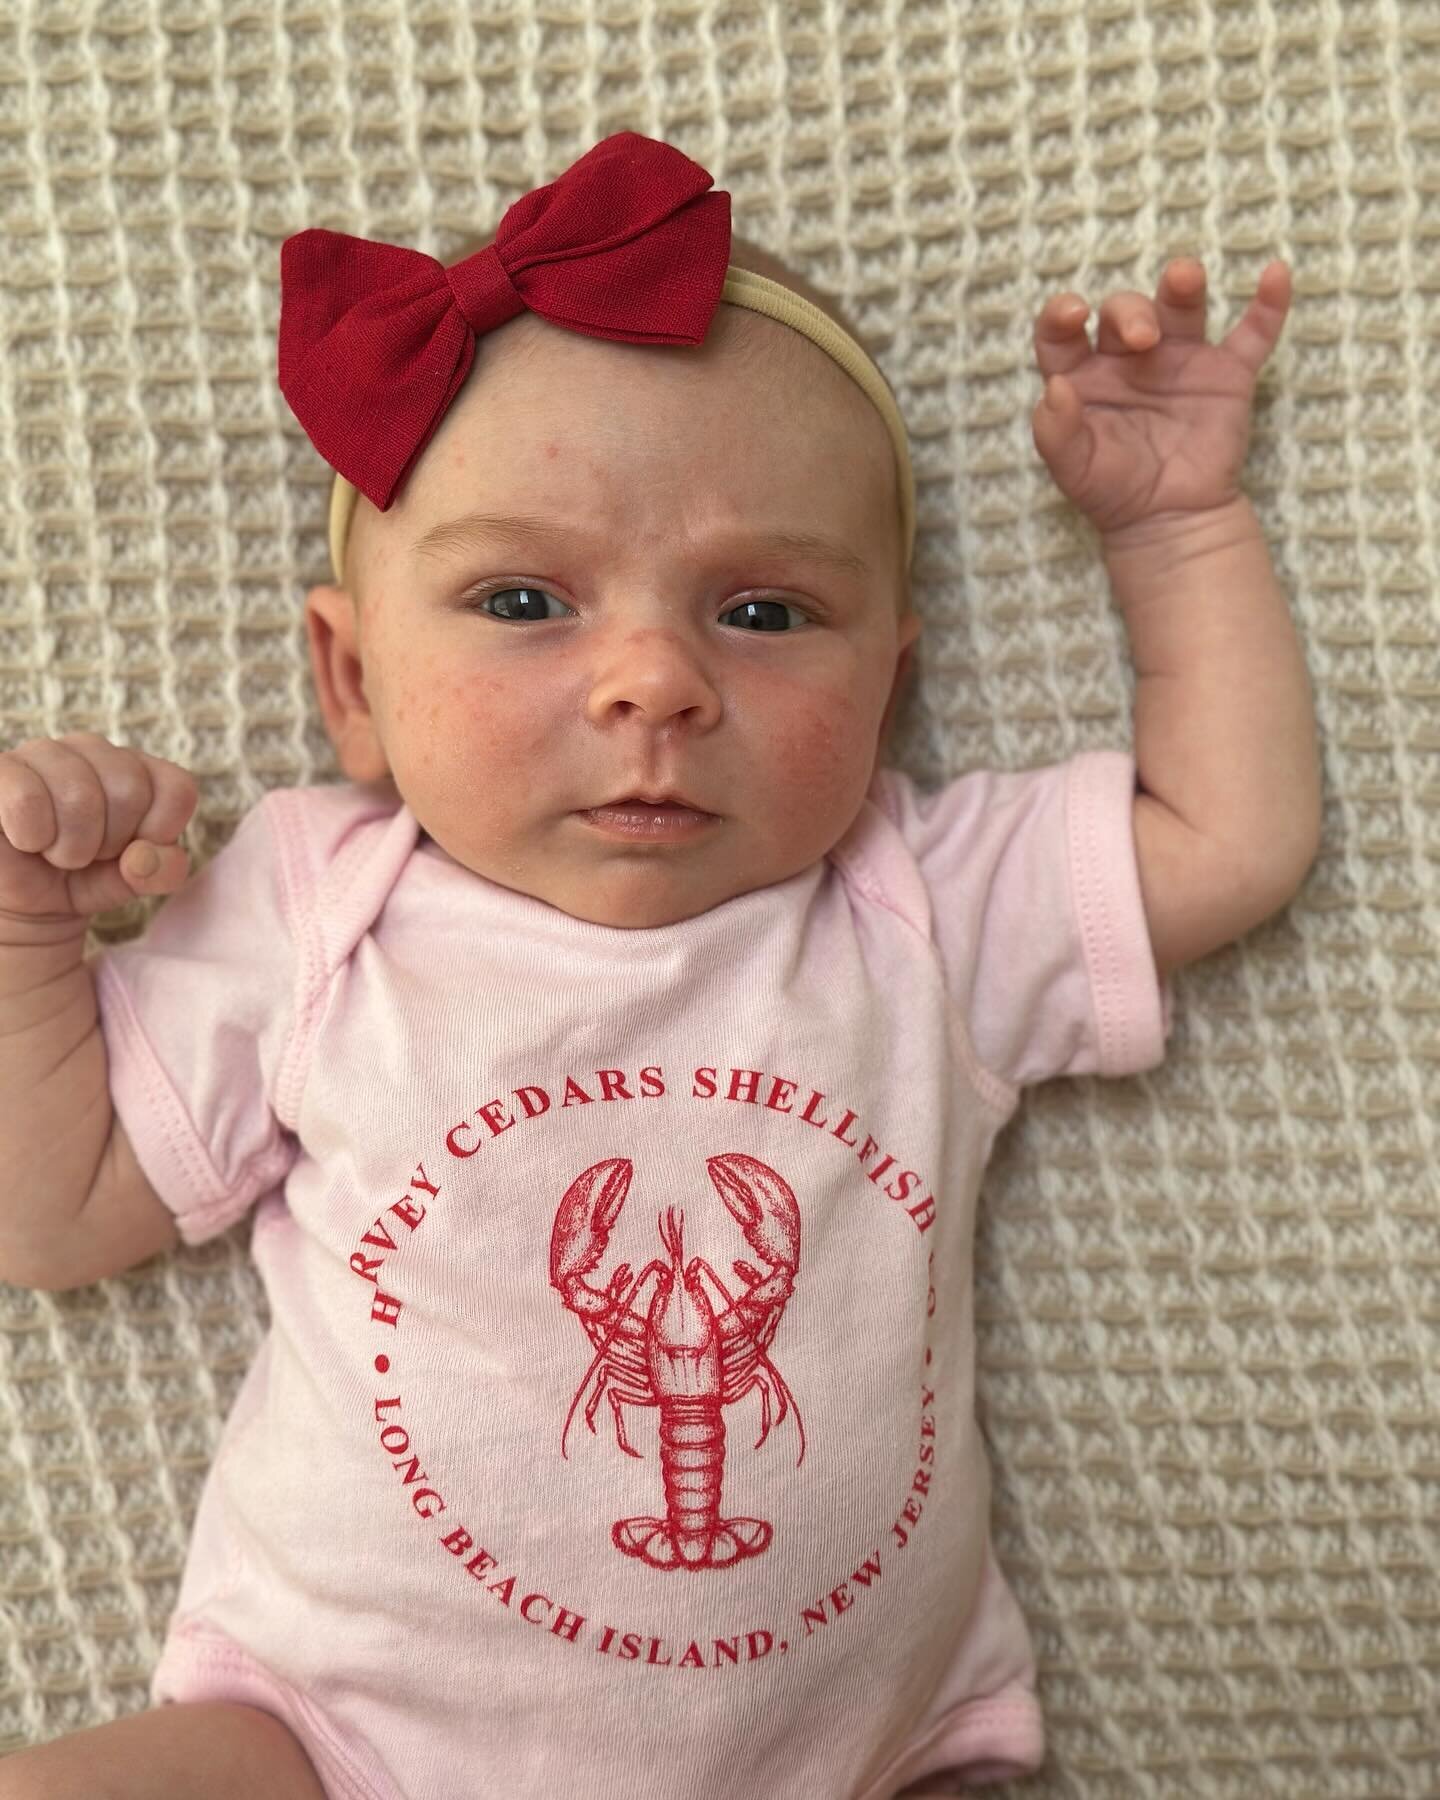 The littlest lobster joined our crew!! Lucy Eloise was born 12/8/23 &amp; she can&rsquo;t wait for summer on LBI! 🦞☀️